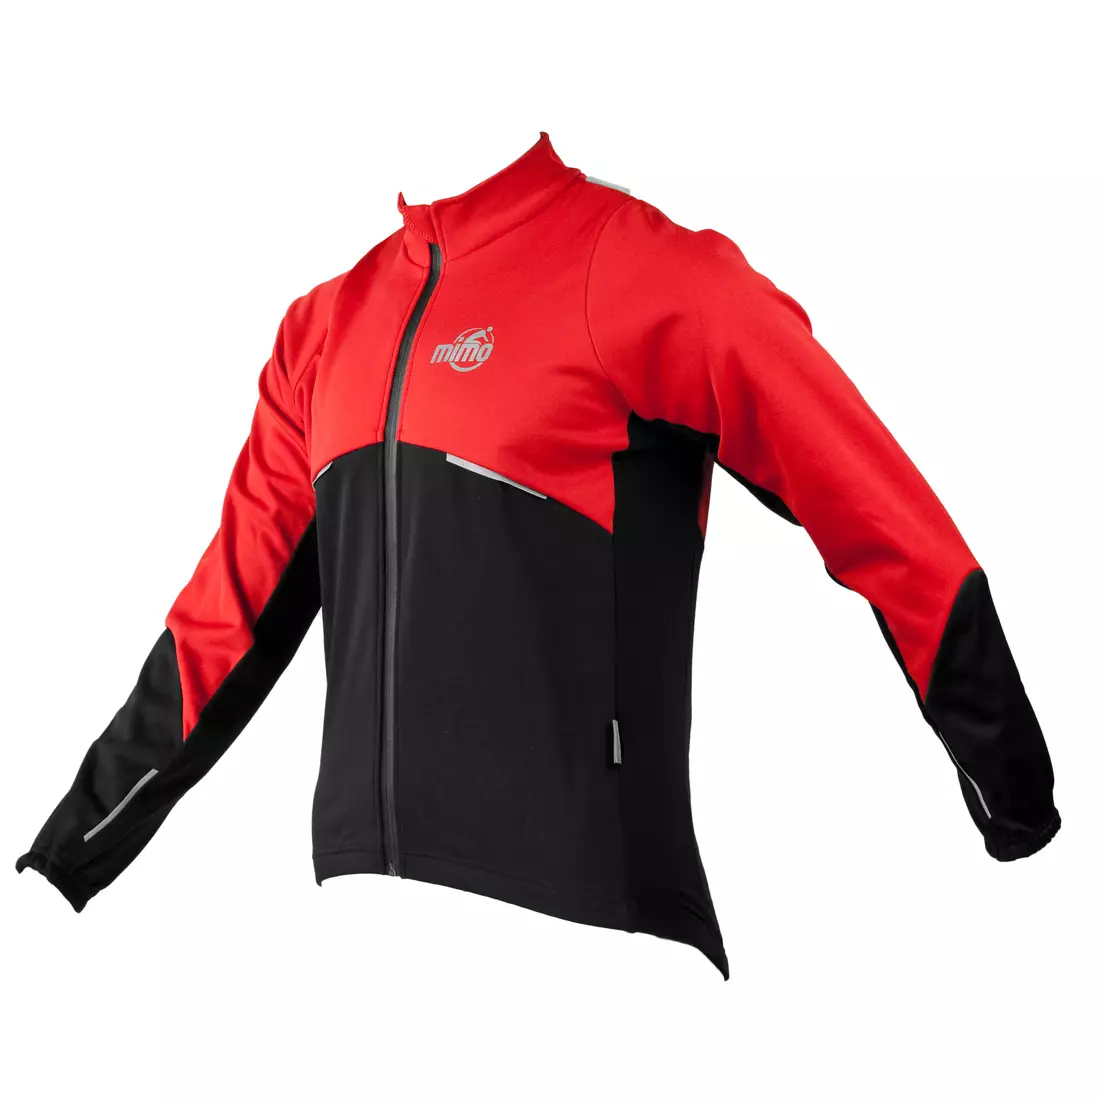 MikeSPORT DRAGON softshell cycling jacket, black and red